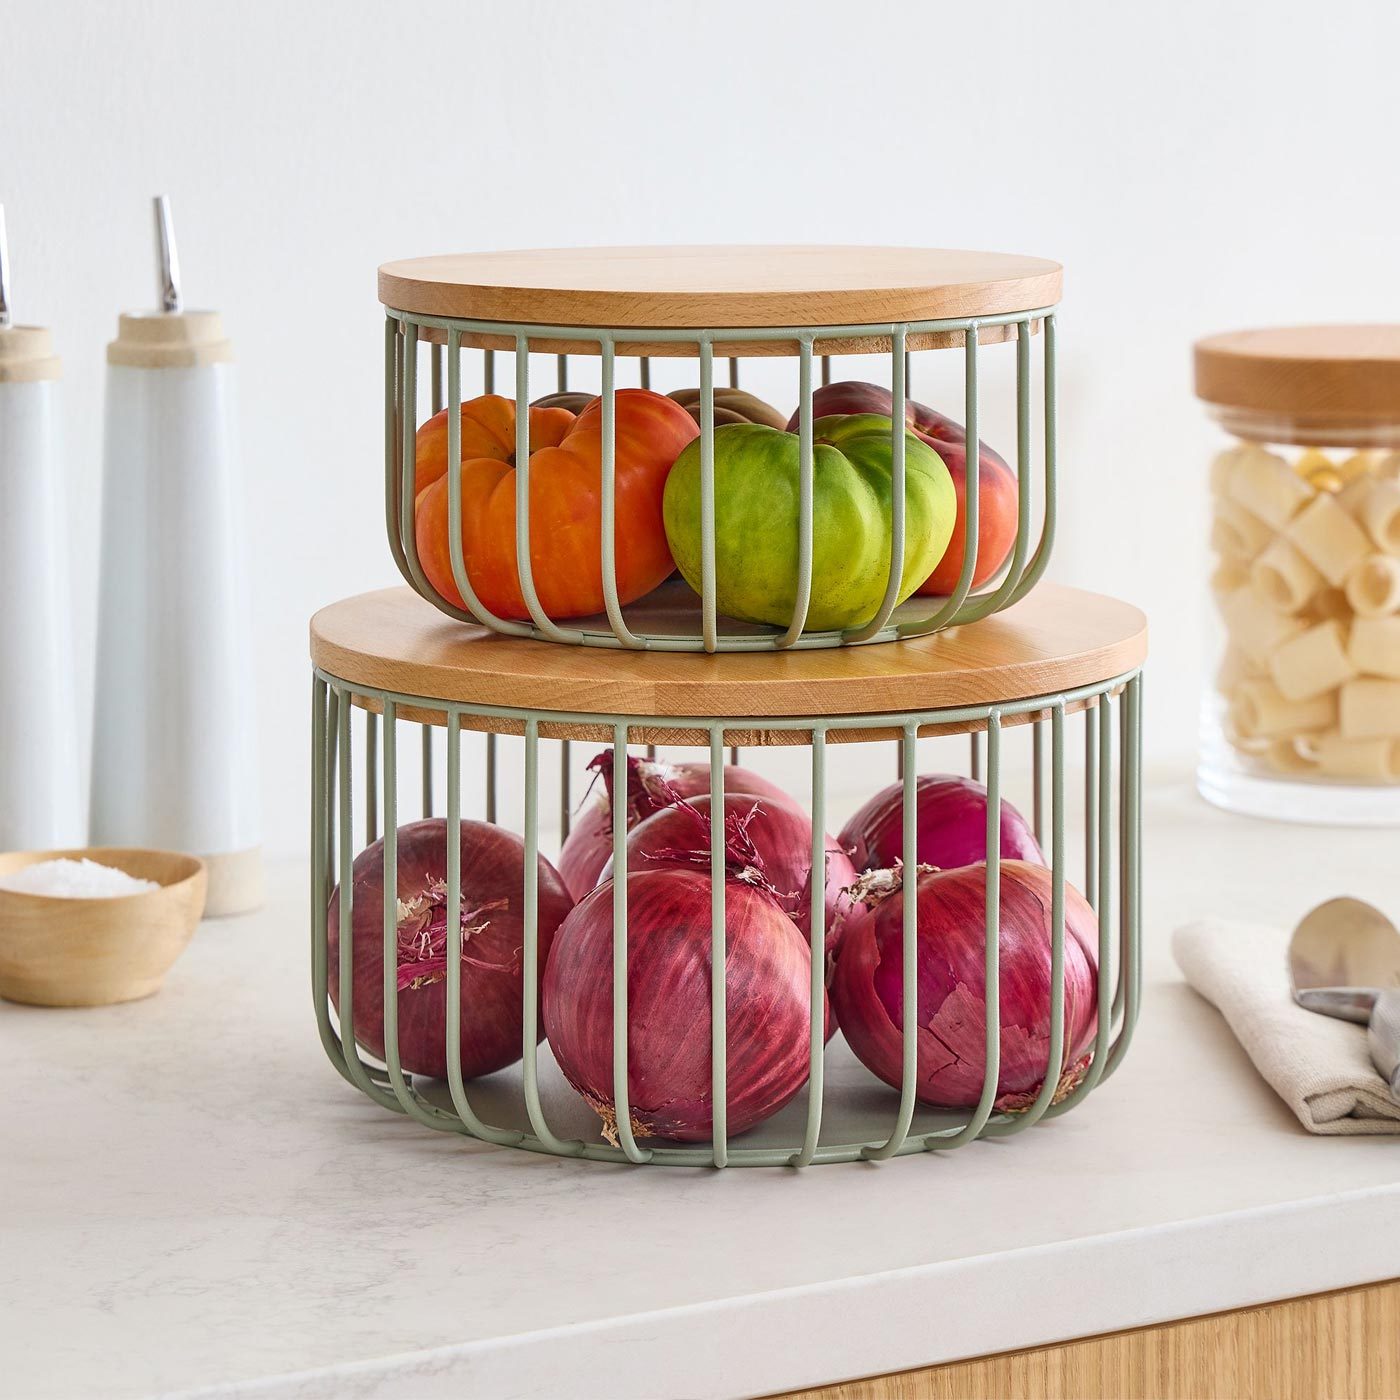 Is It Safe To Store Your Fruits and Veggies In Metal Containers